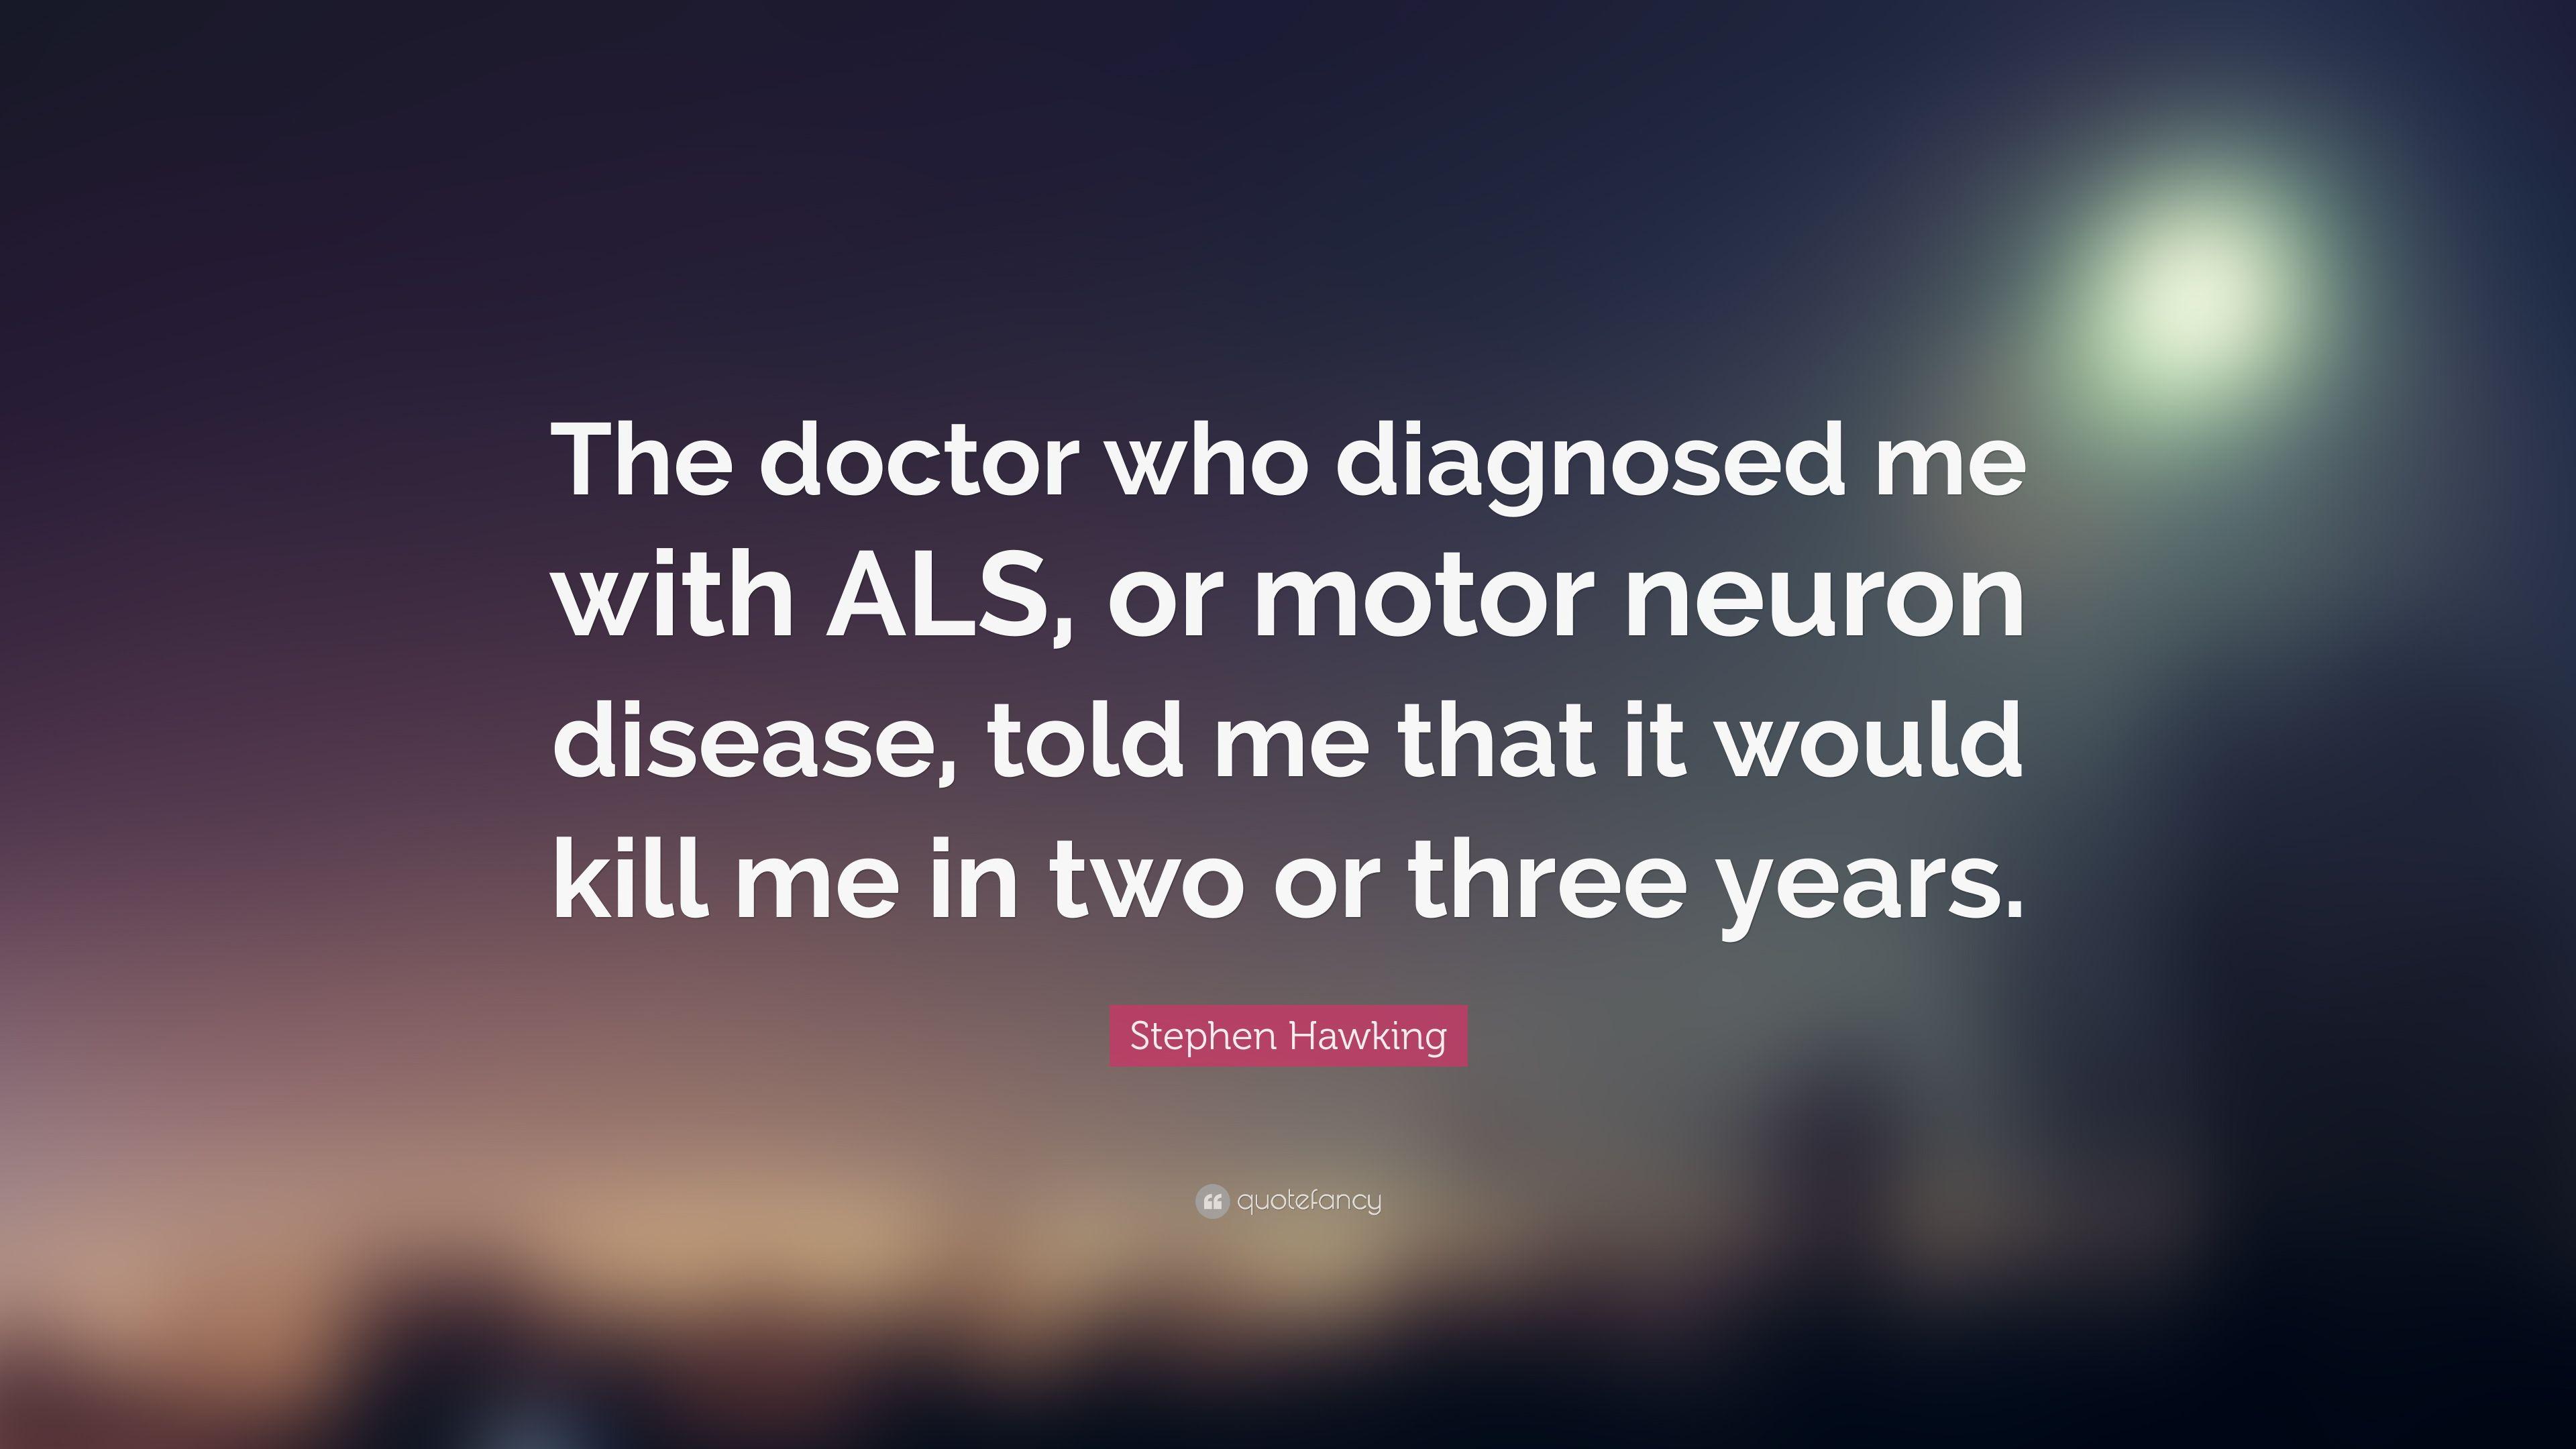 Stephen Hawking Quote: “The doctor who diagnosed me with ALS, or